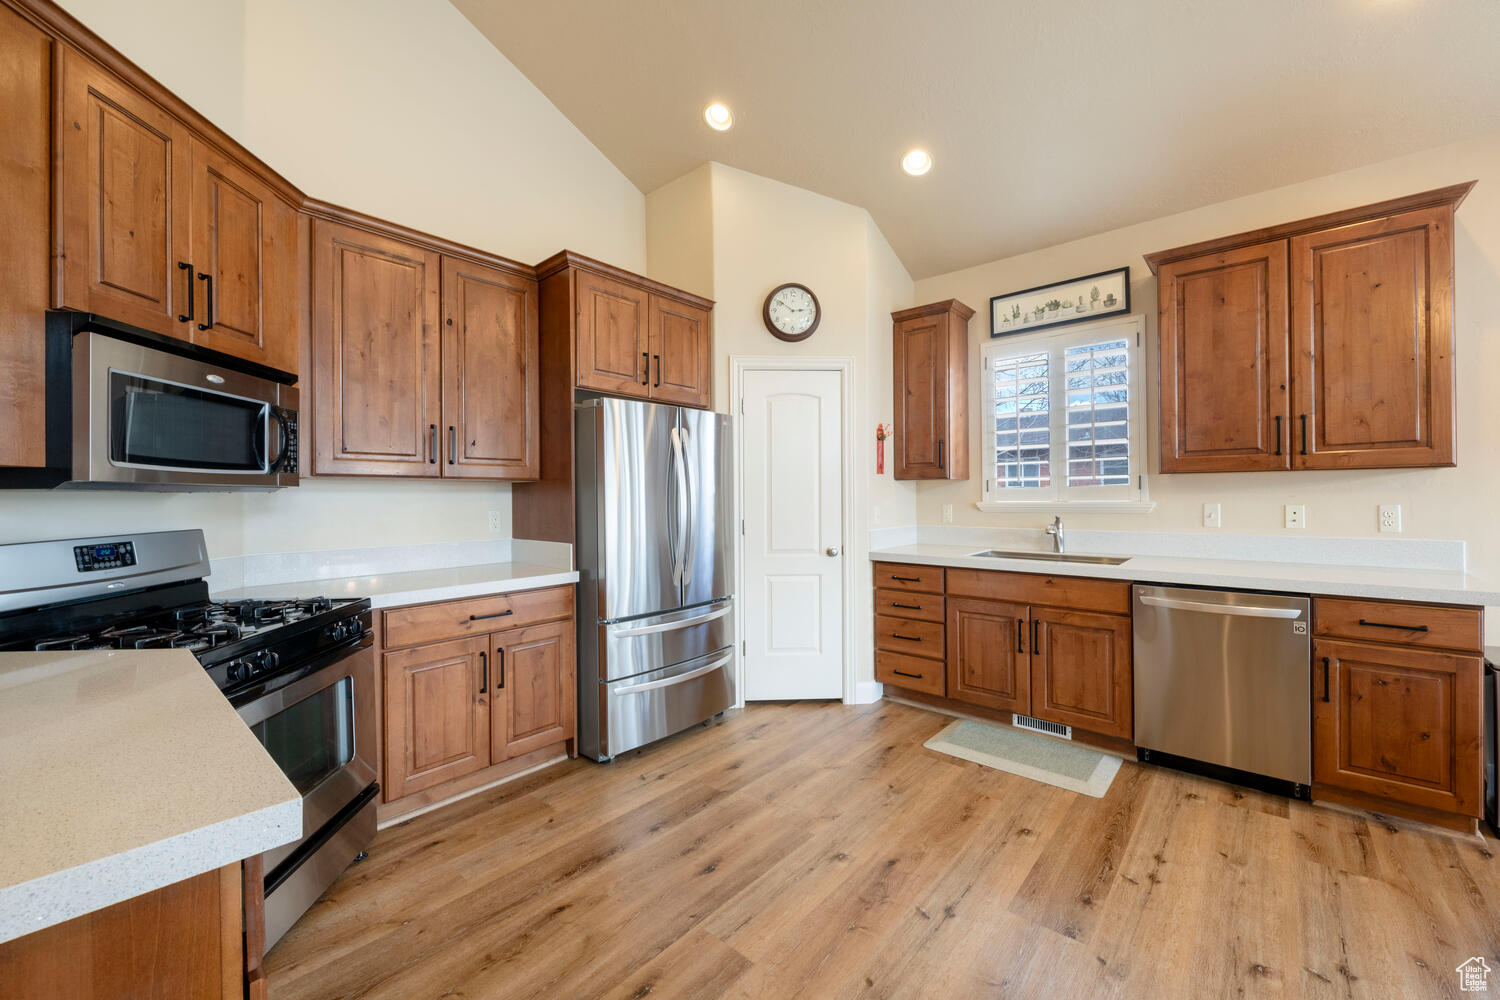 Kitchen featuring vaulted ceiling, stainless steel appliances, light hardwood / wood-style flooring, and sink